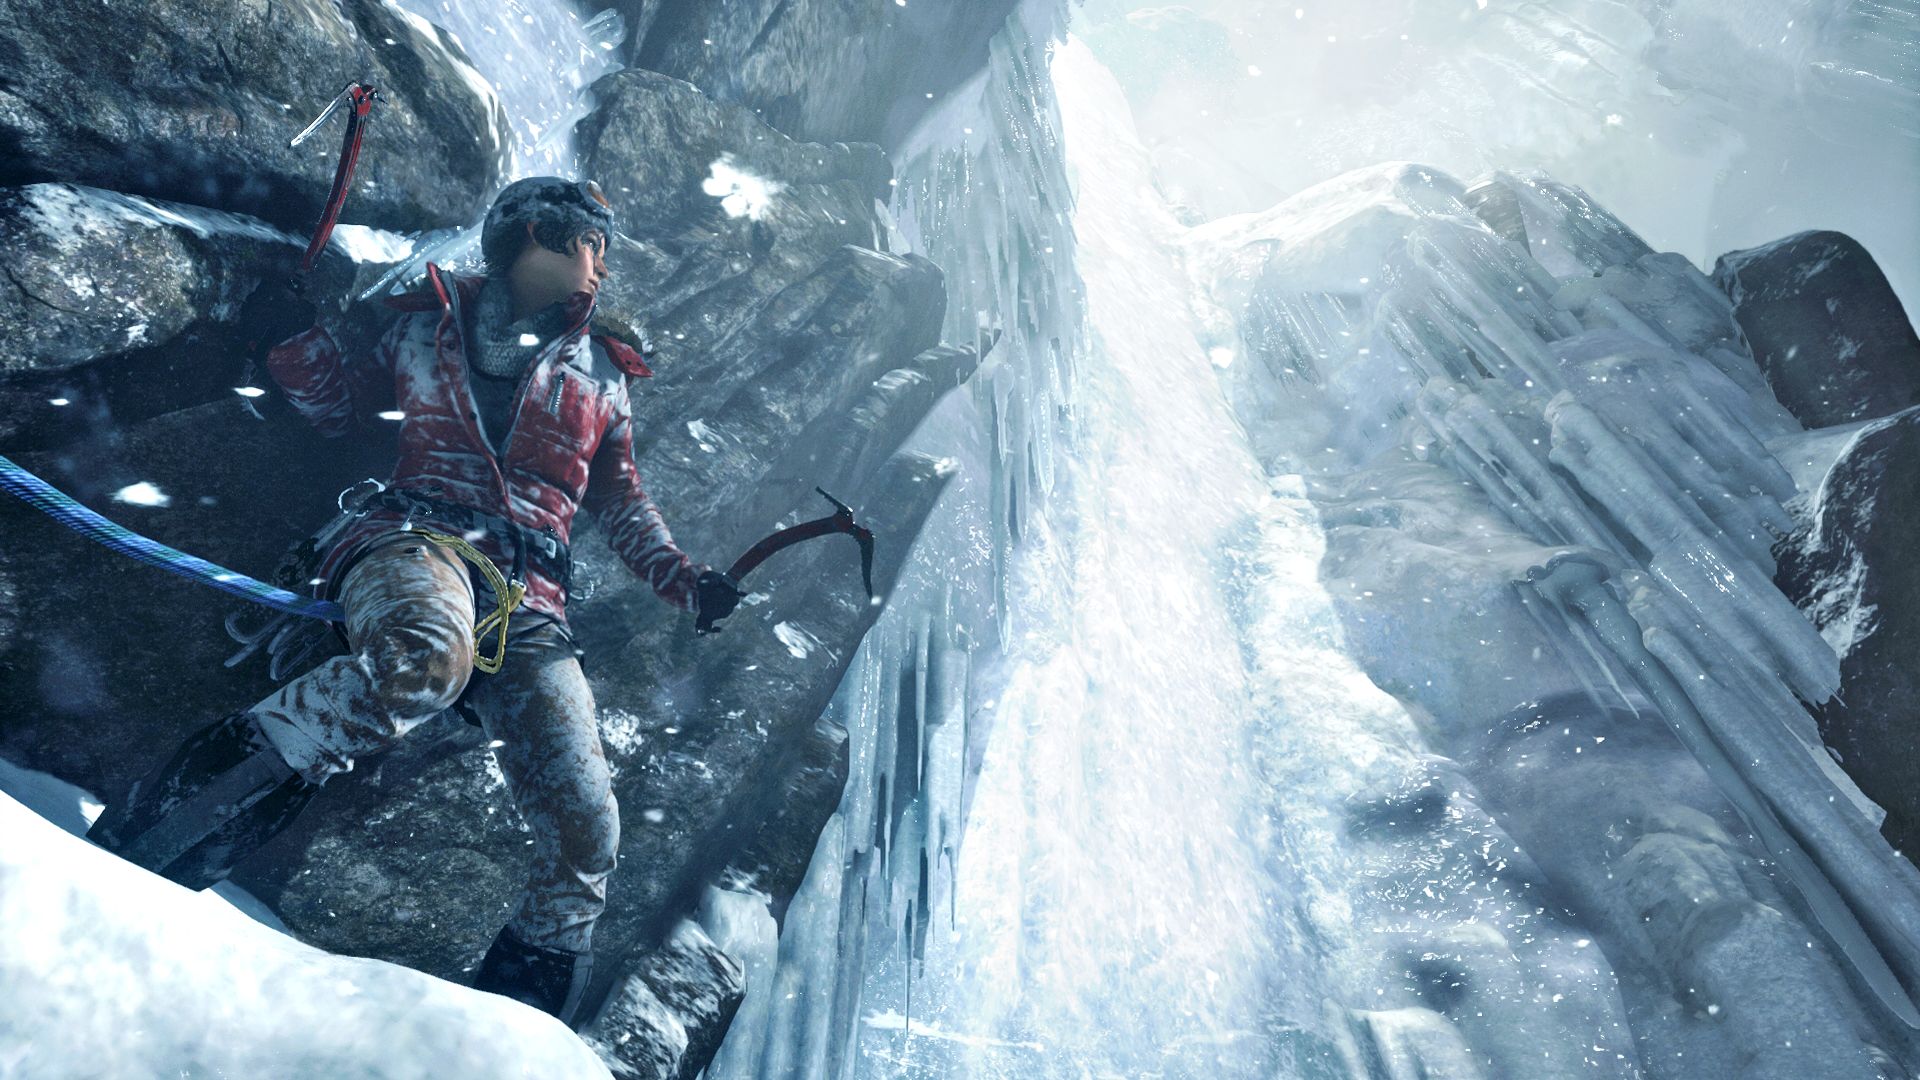 “Rise of the Tomb Raider” Has Disappointing UK Sales - Less Than 65,000 Units